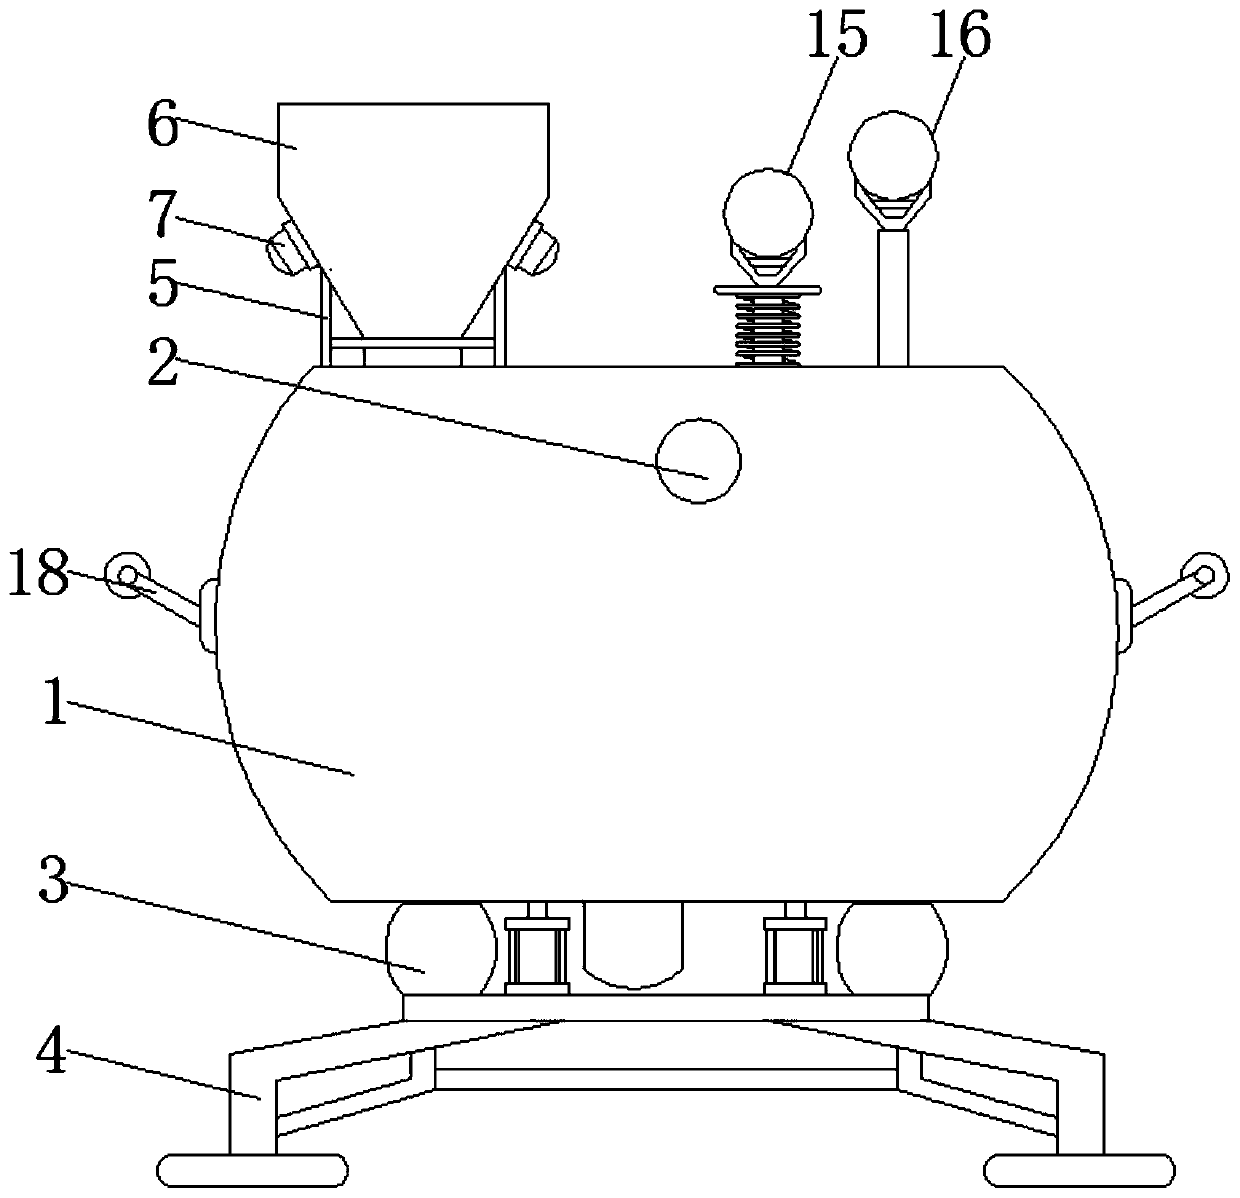 Continuous serving device for batter training